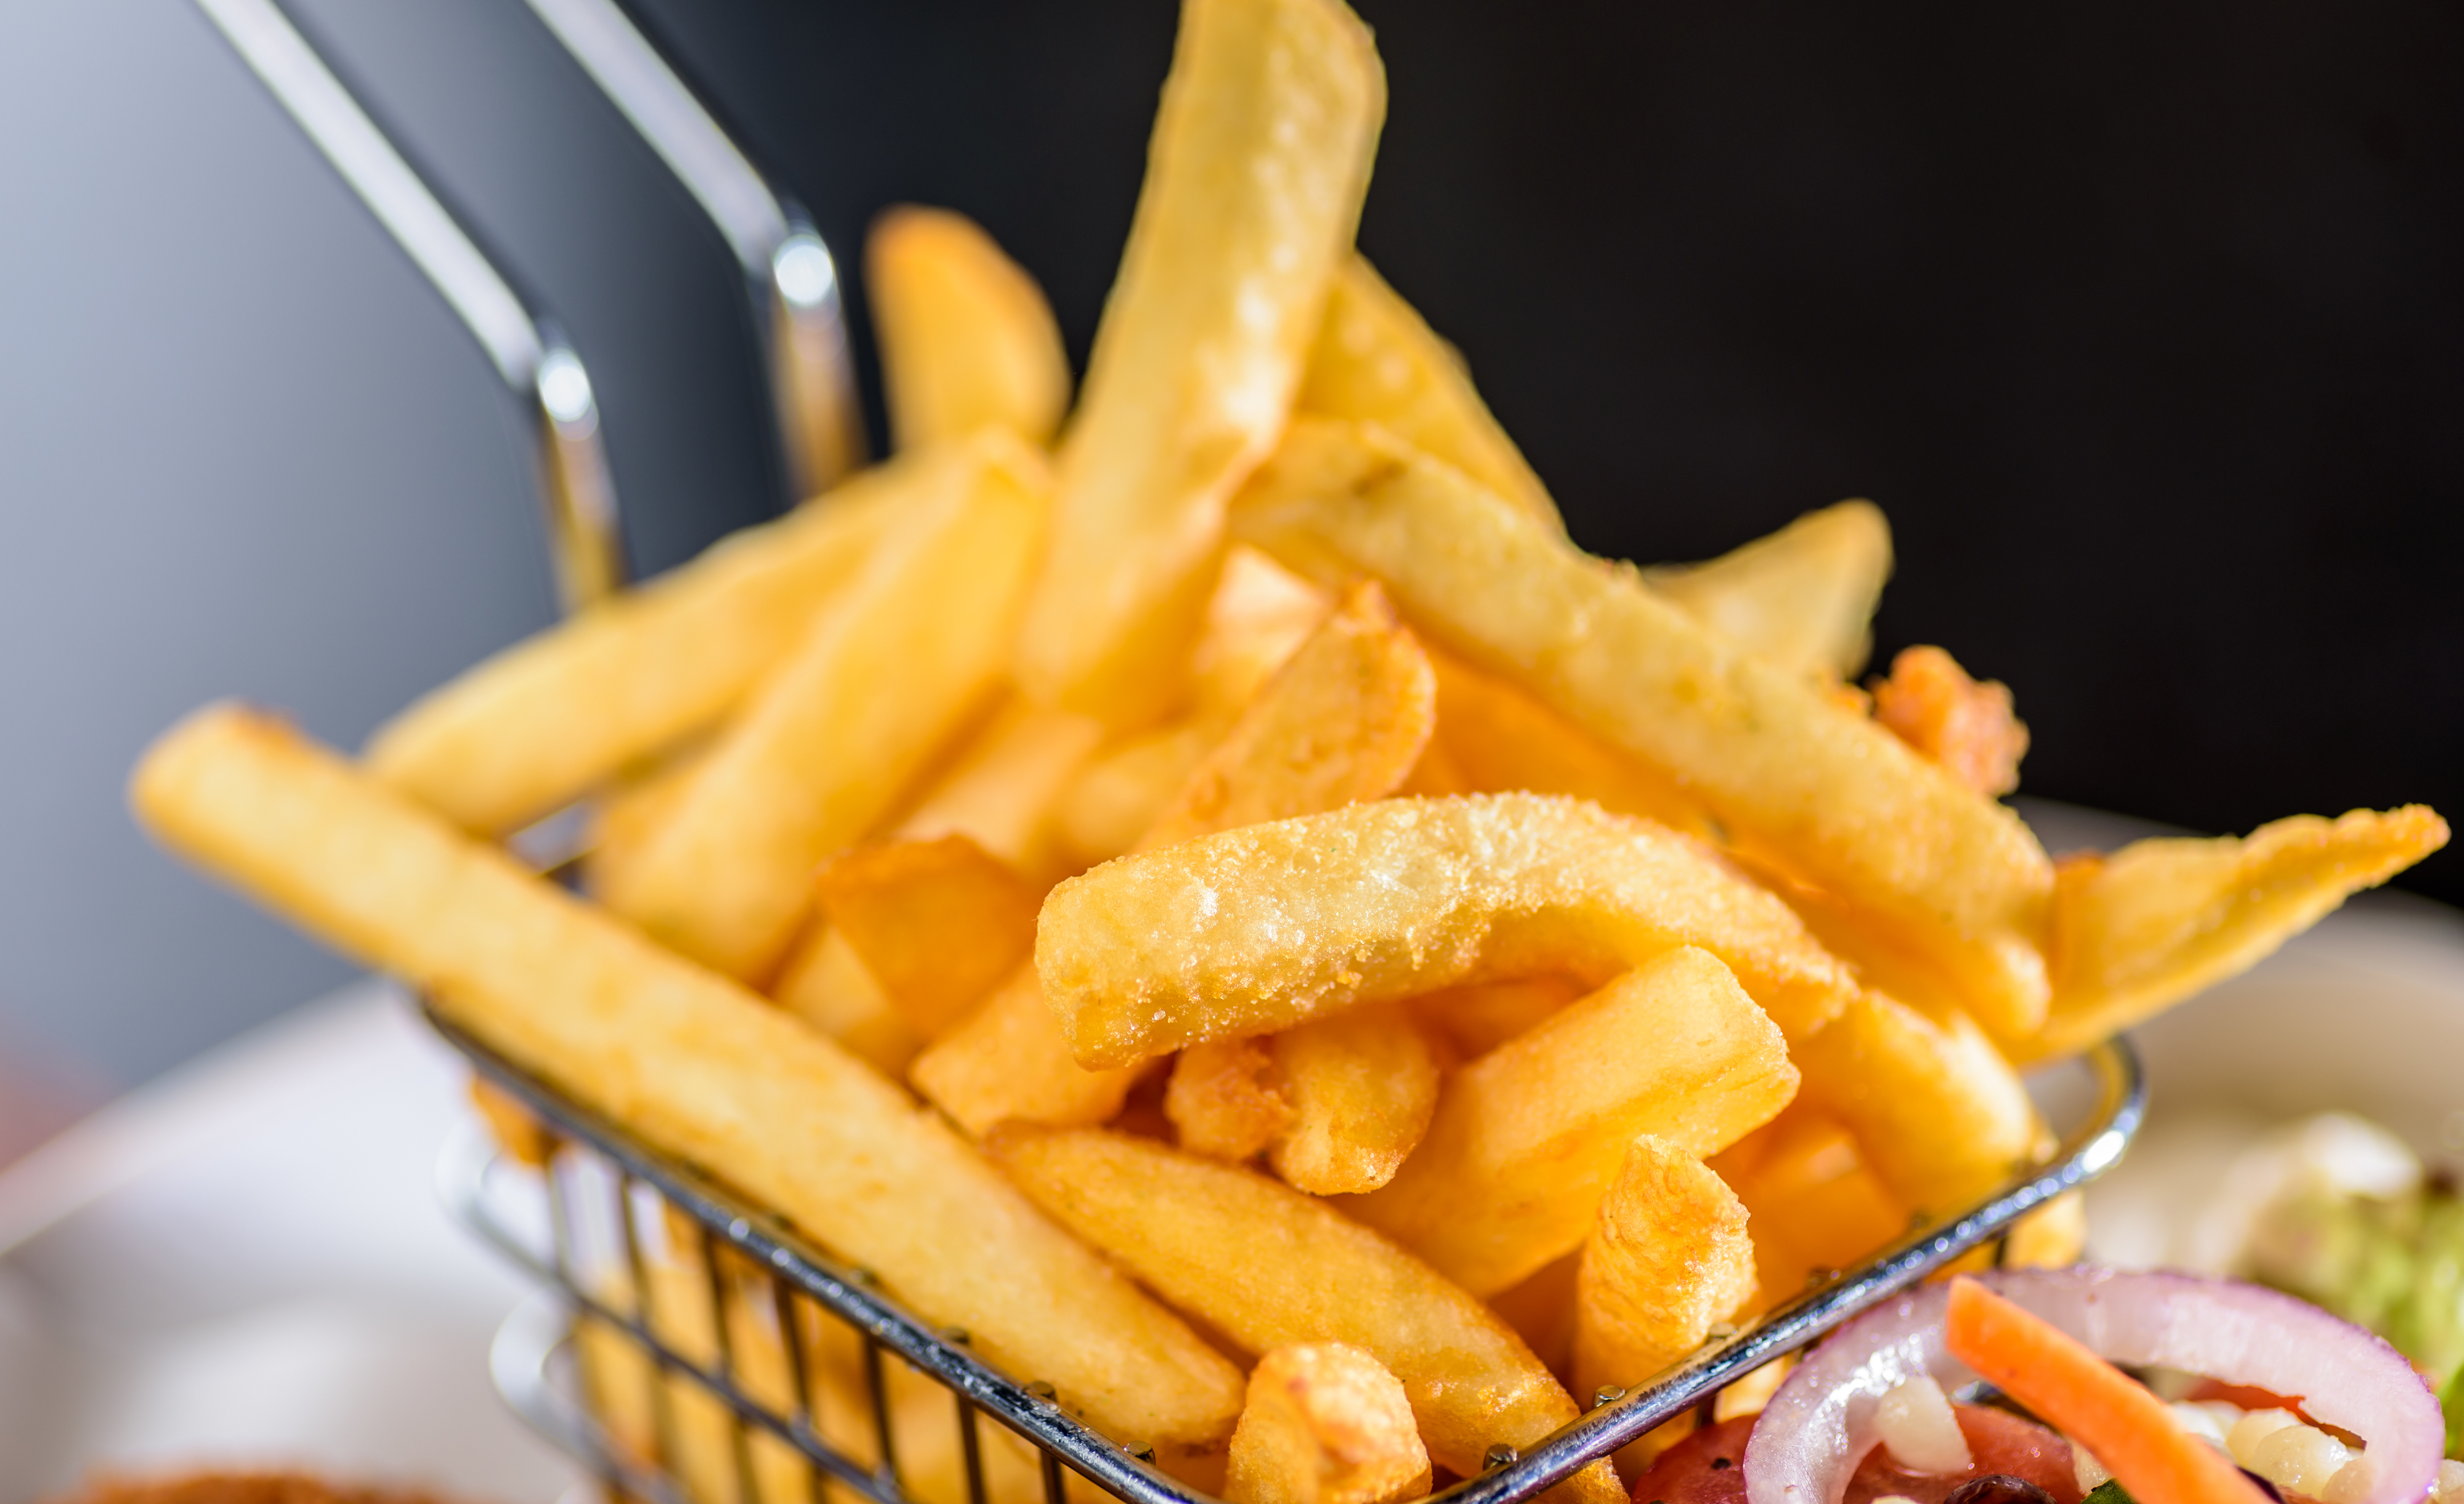 A basket of crispy french fries served beside a salad